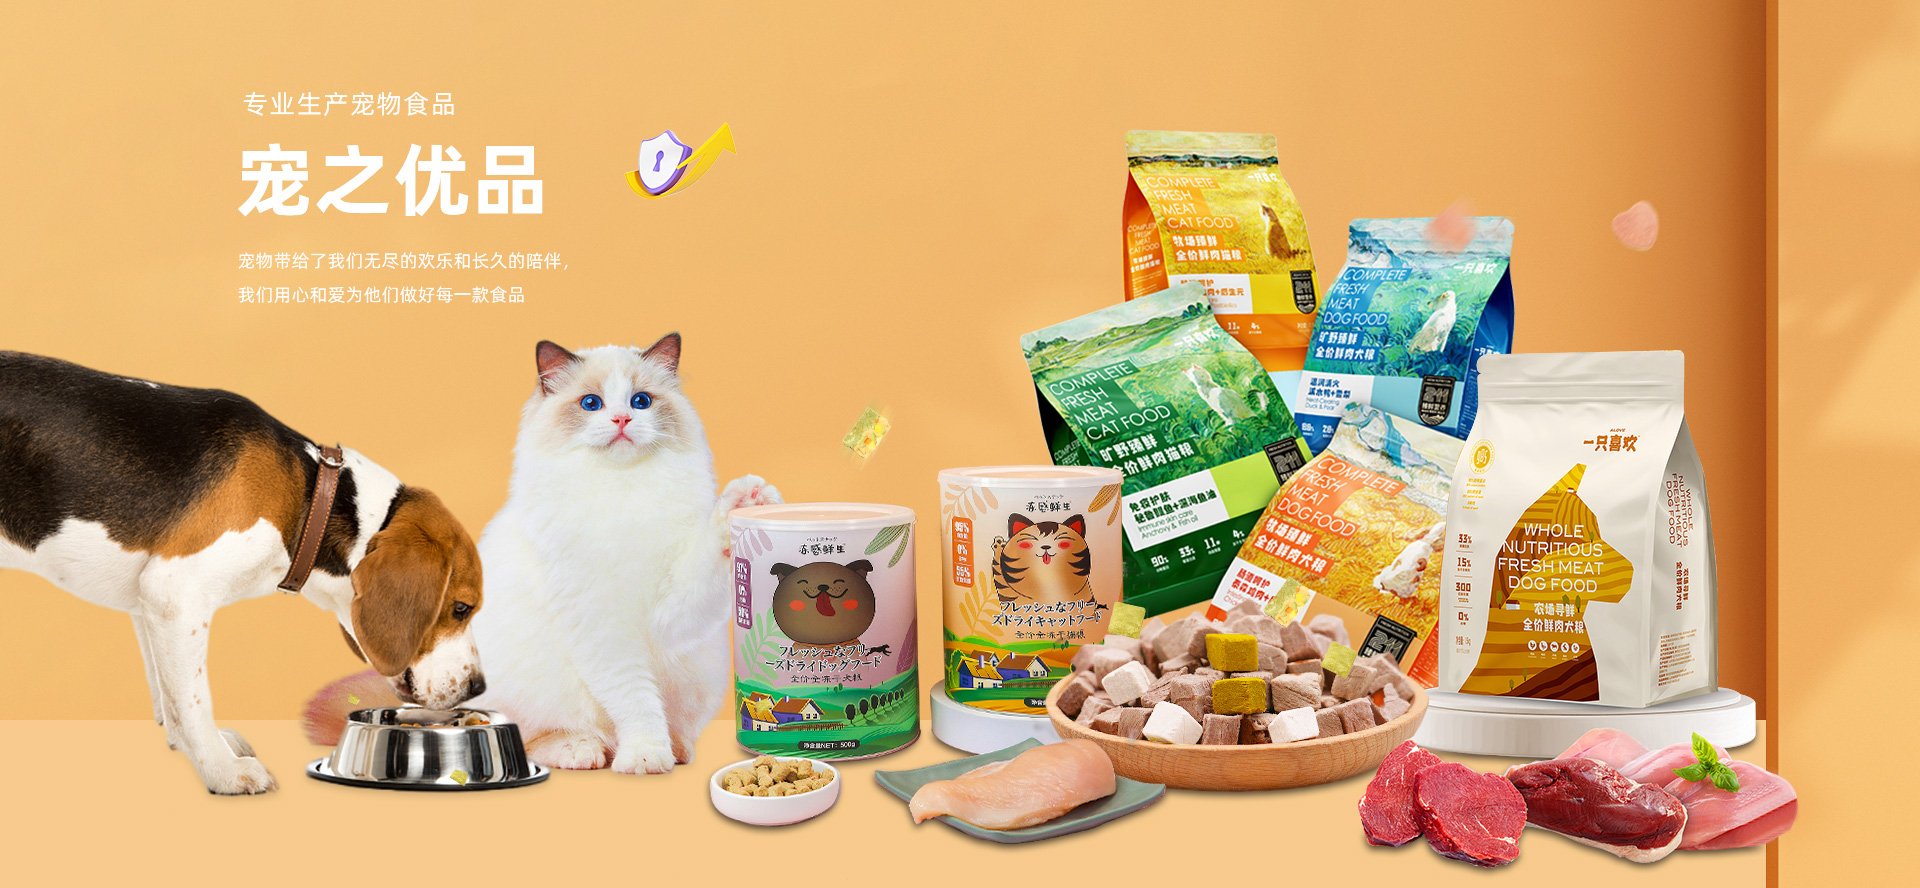 Shandong Superior Products Of Pet Food Co.,Ltd banner2